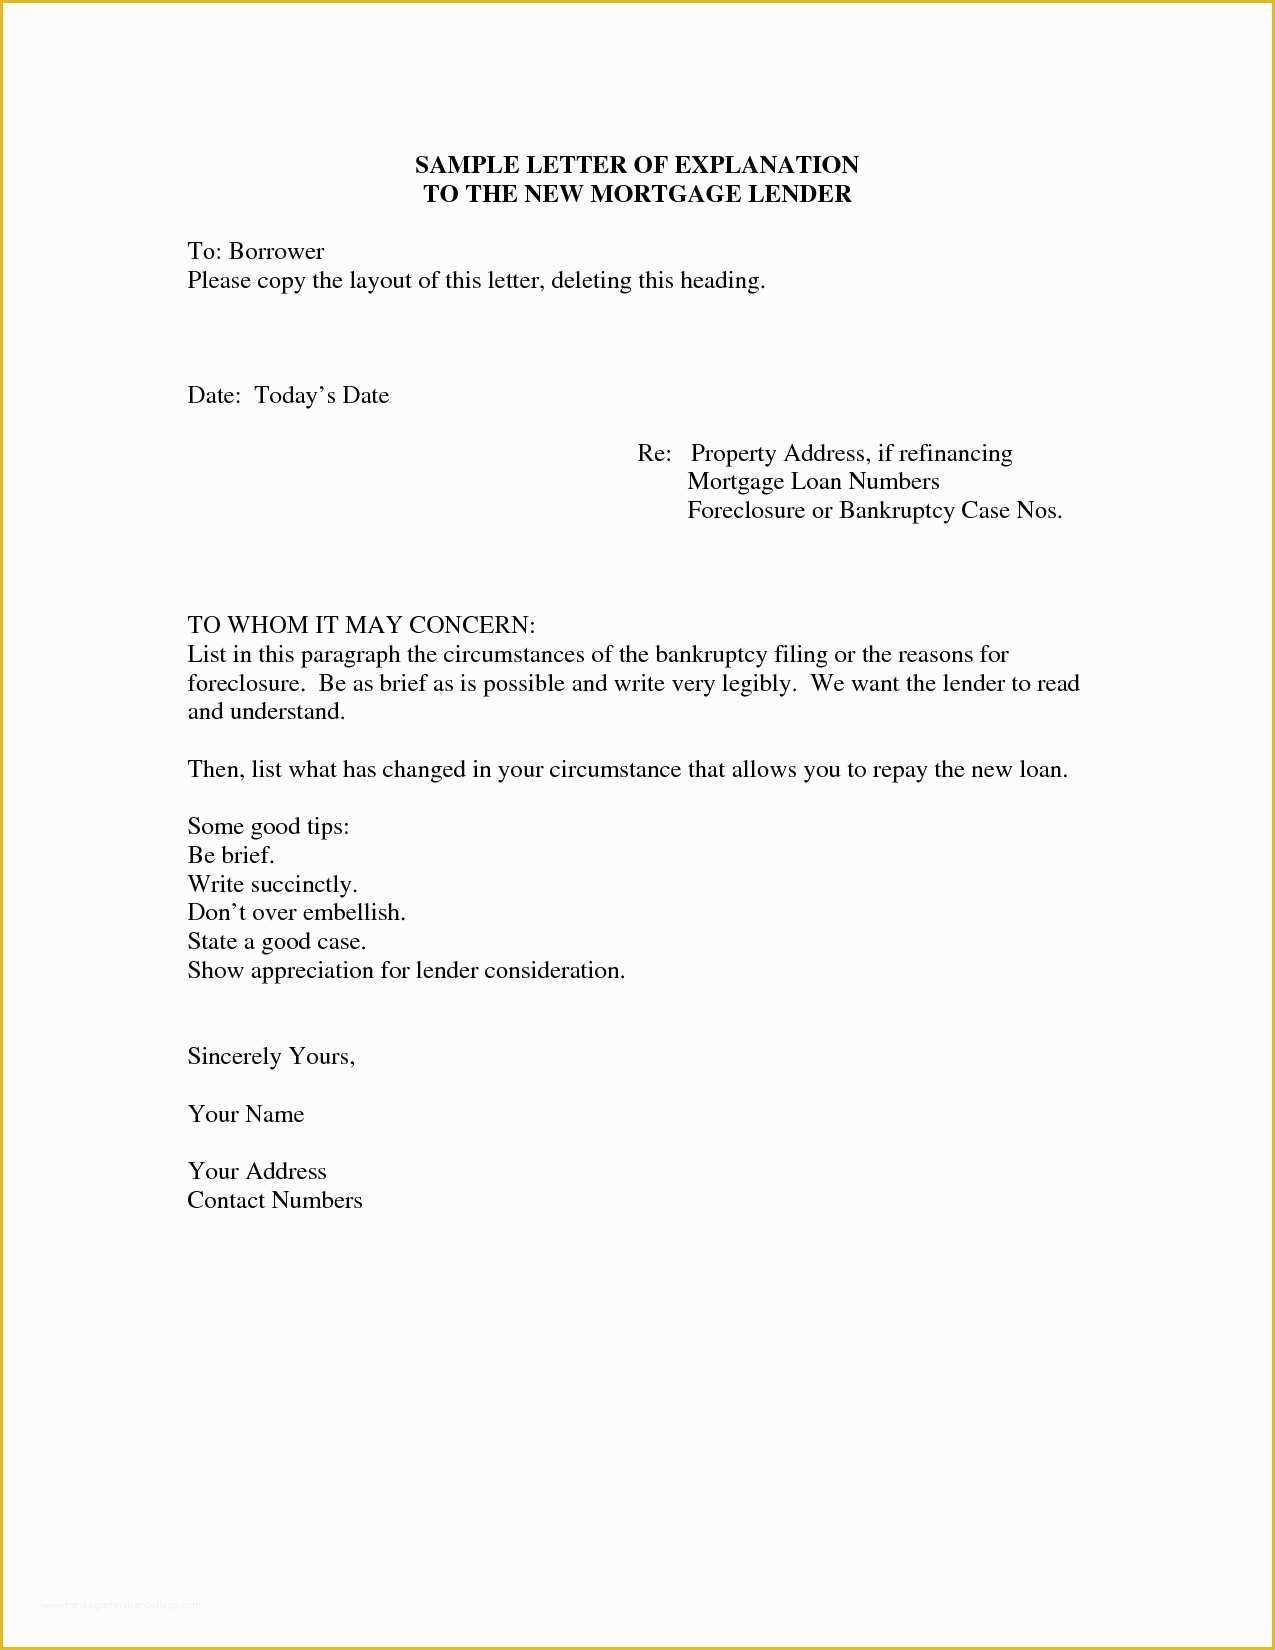 Free foreclosure Letter Template Of Sample Resume foreclosure attorney Valid Free foreclosure